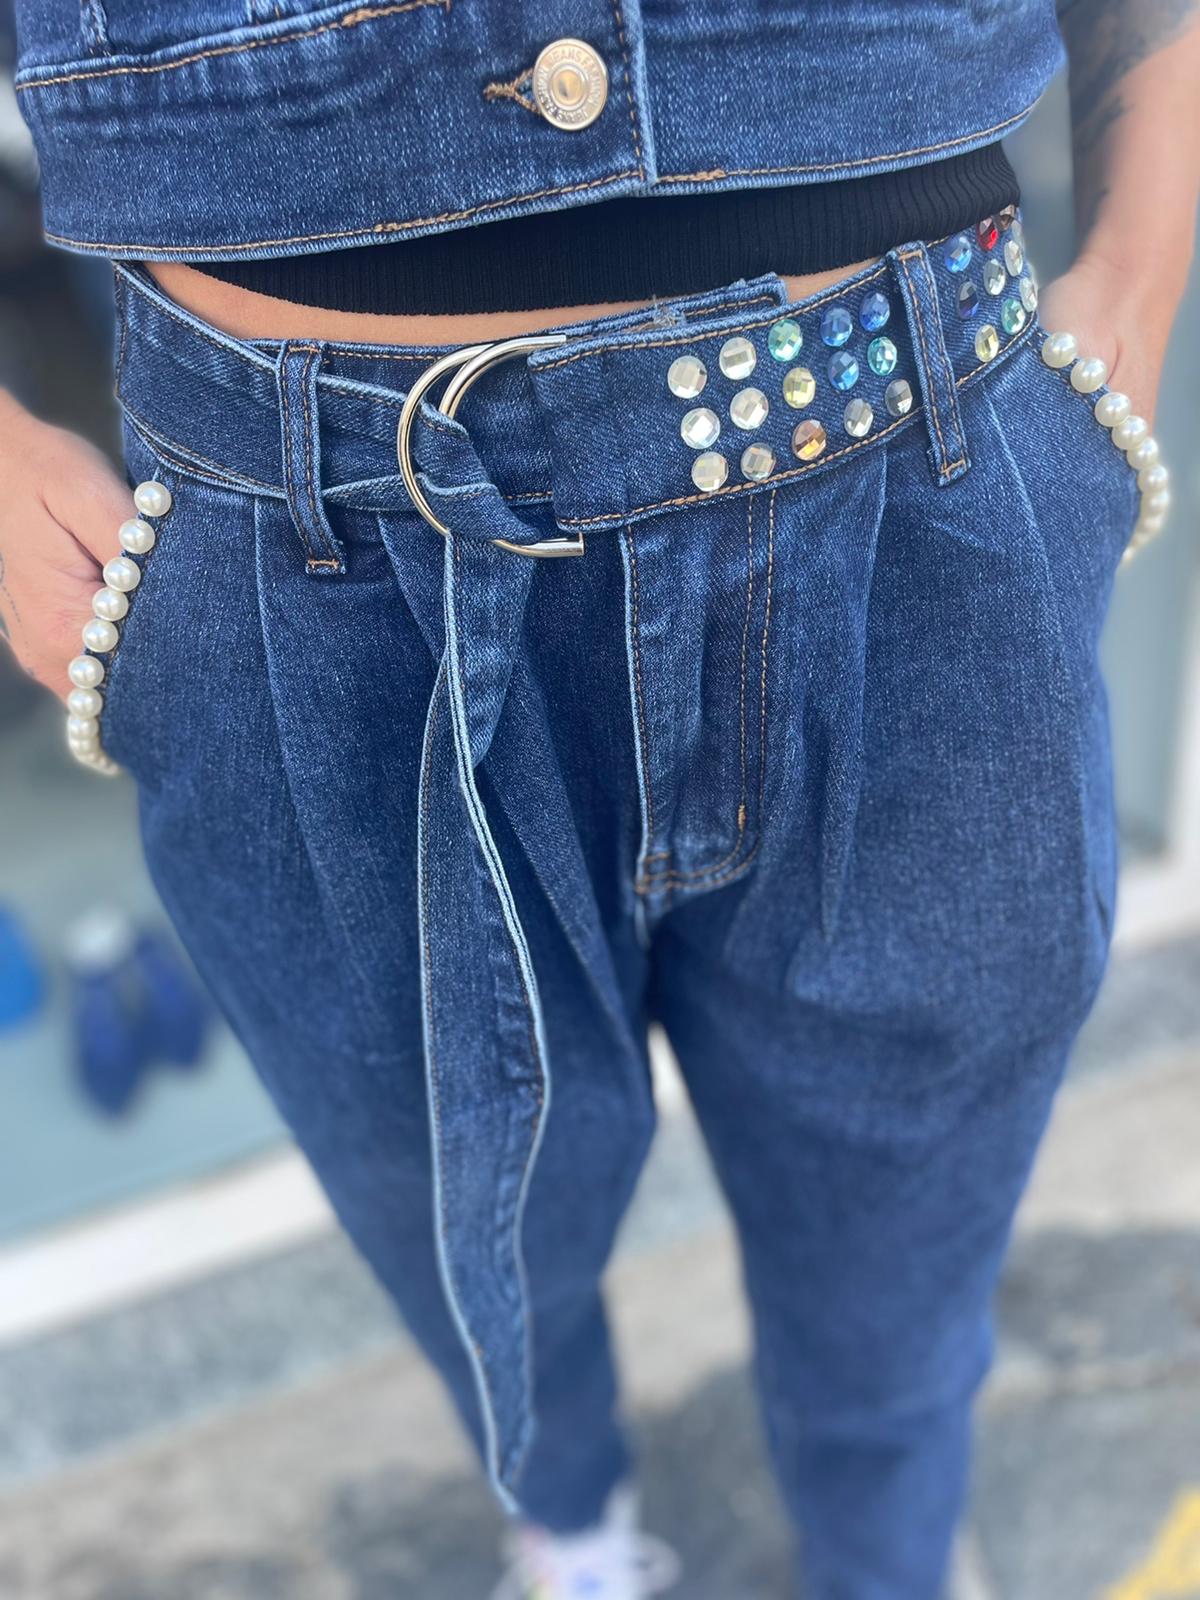 Jeans with stones and pearls